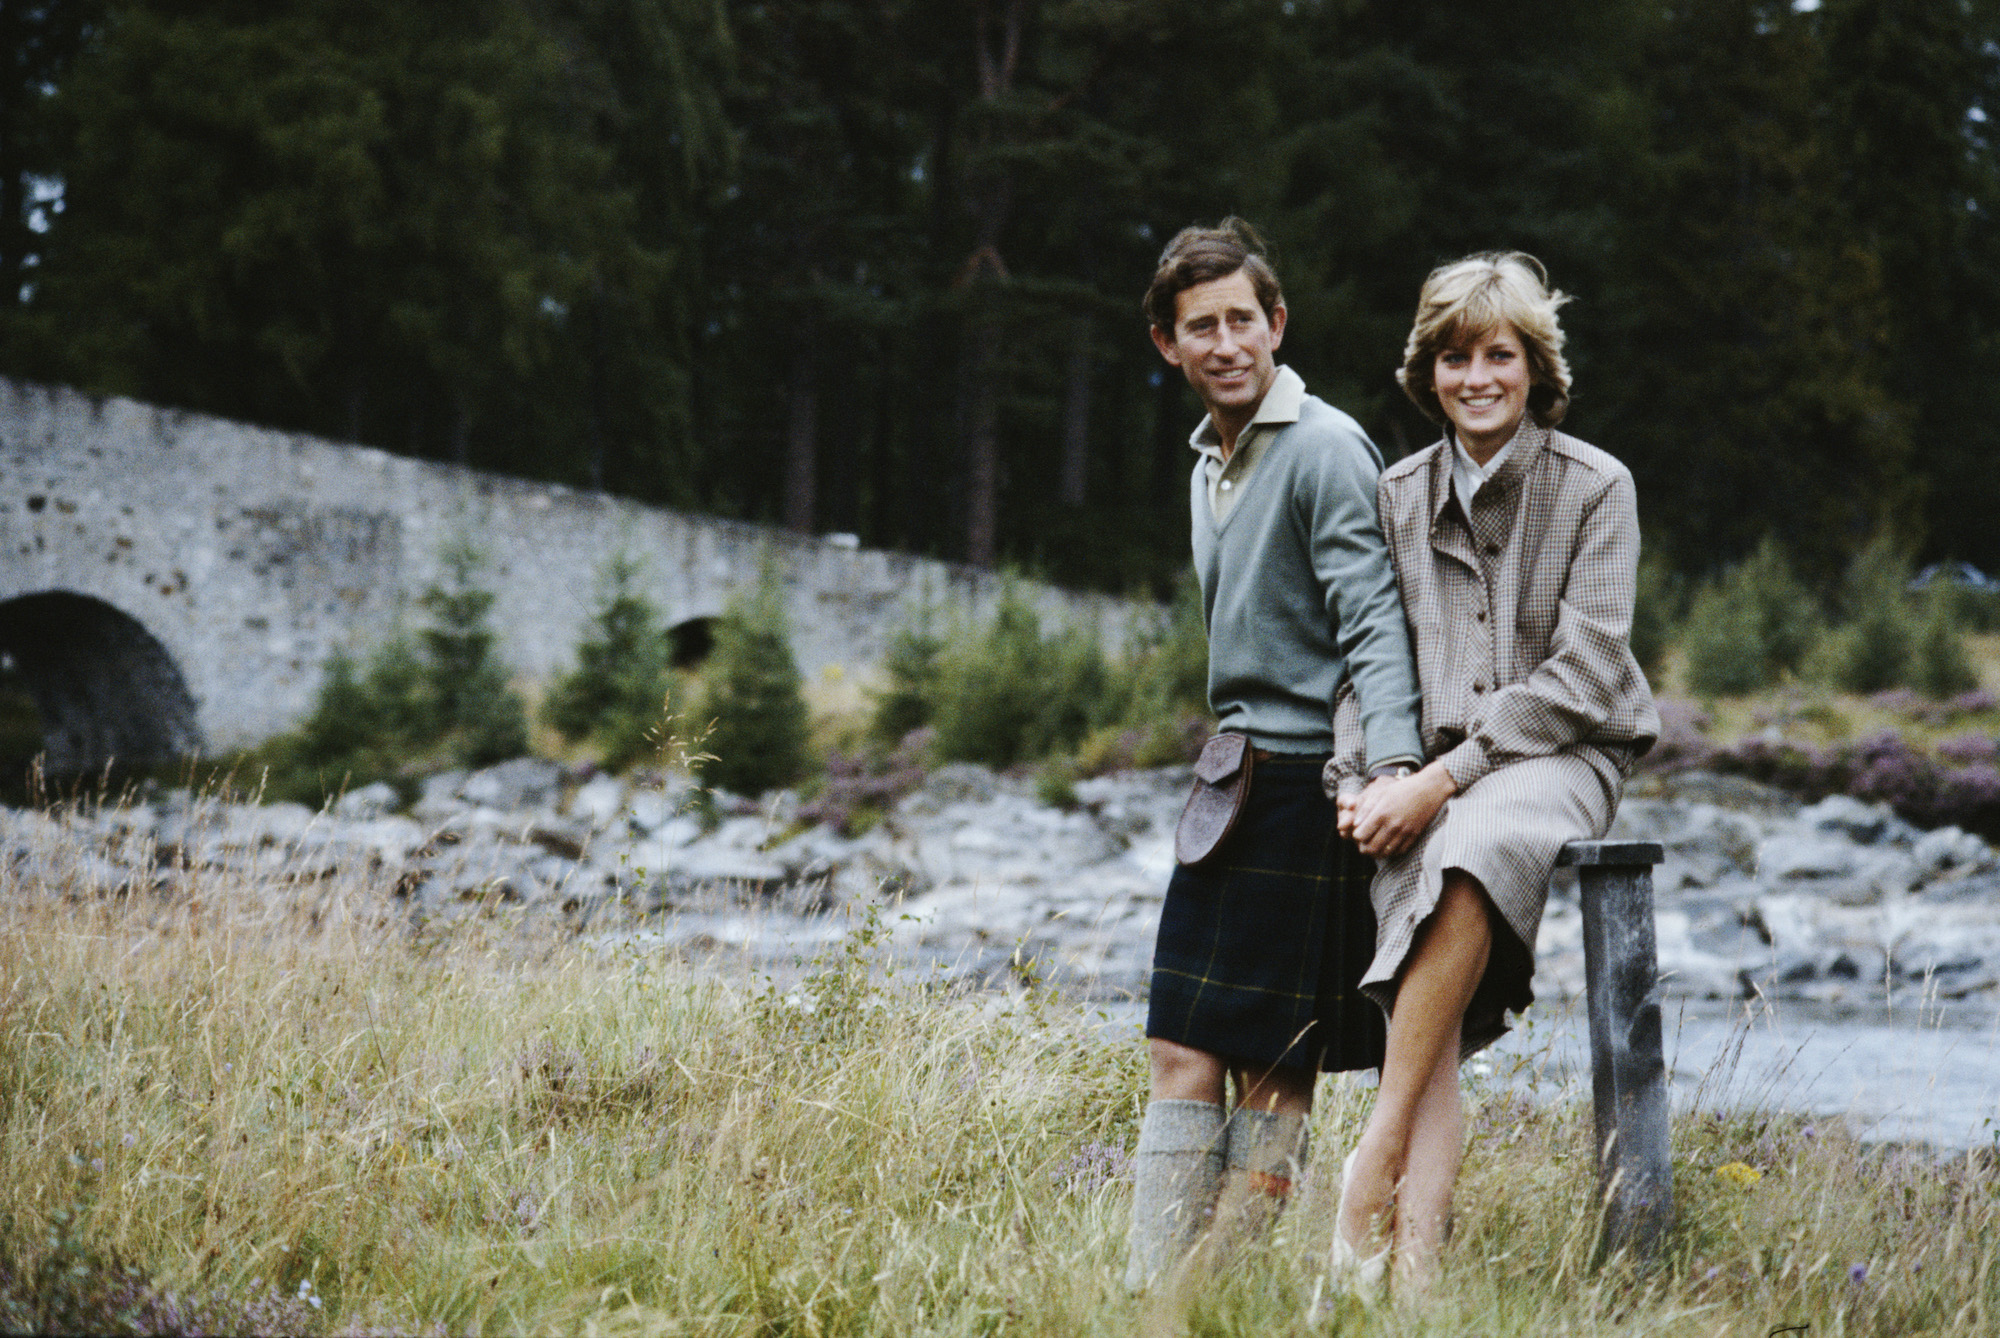 Prince Charles and Princess Diana smiling in front of a stream